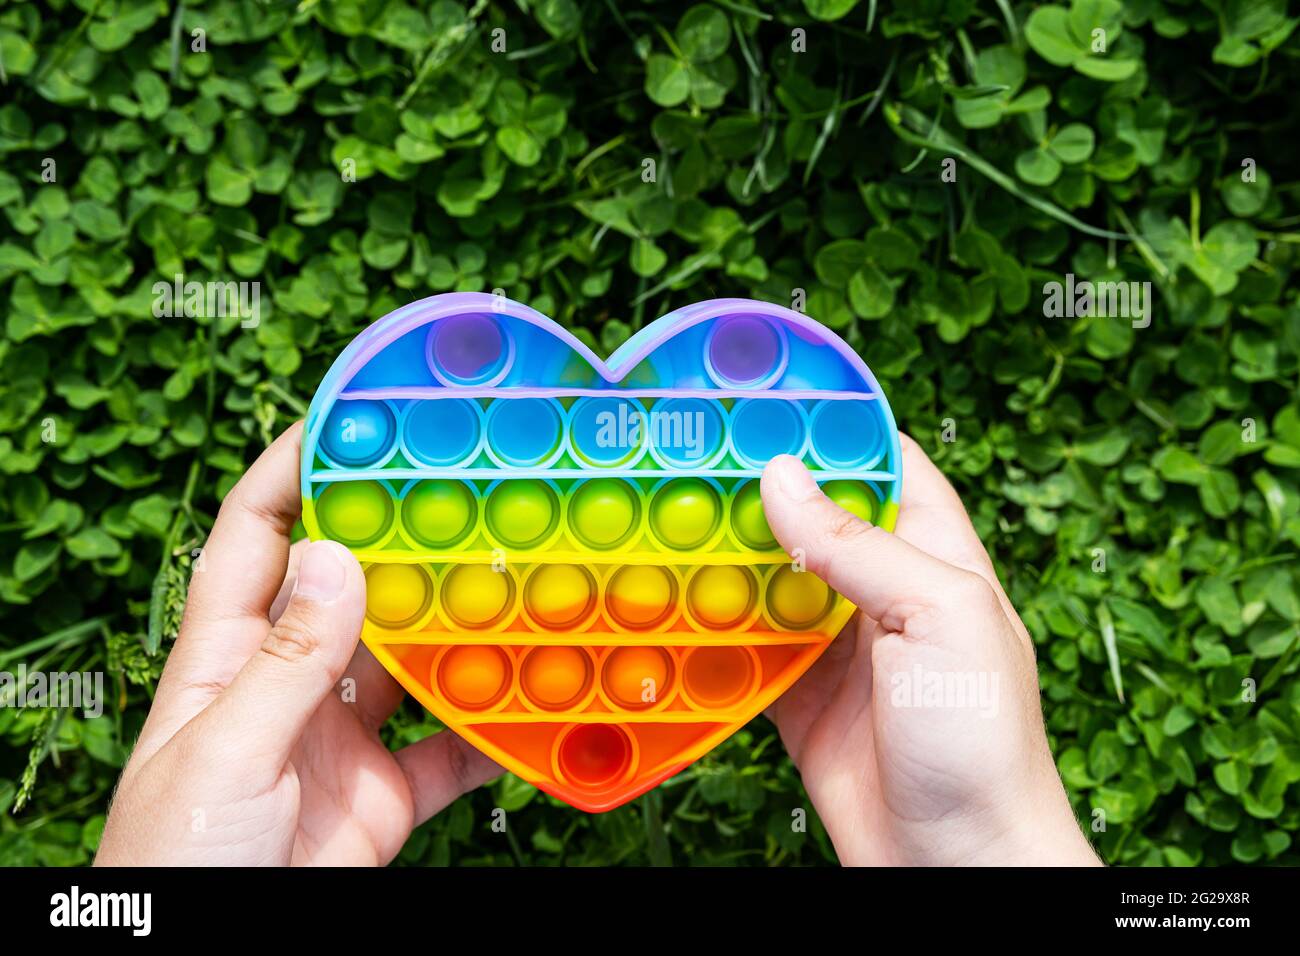 Child plays on the grass with a simple dimple relaxing  toy. Pop it toy heart shaped, rainbow colored in boys hands at summer day. Stock Photo